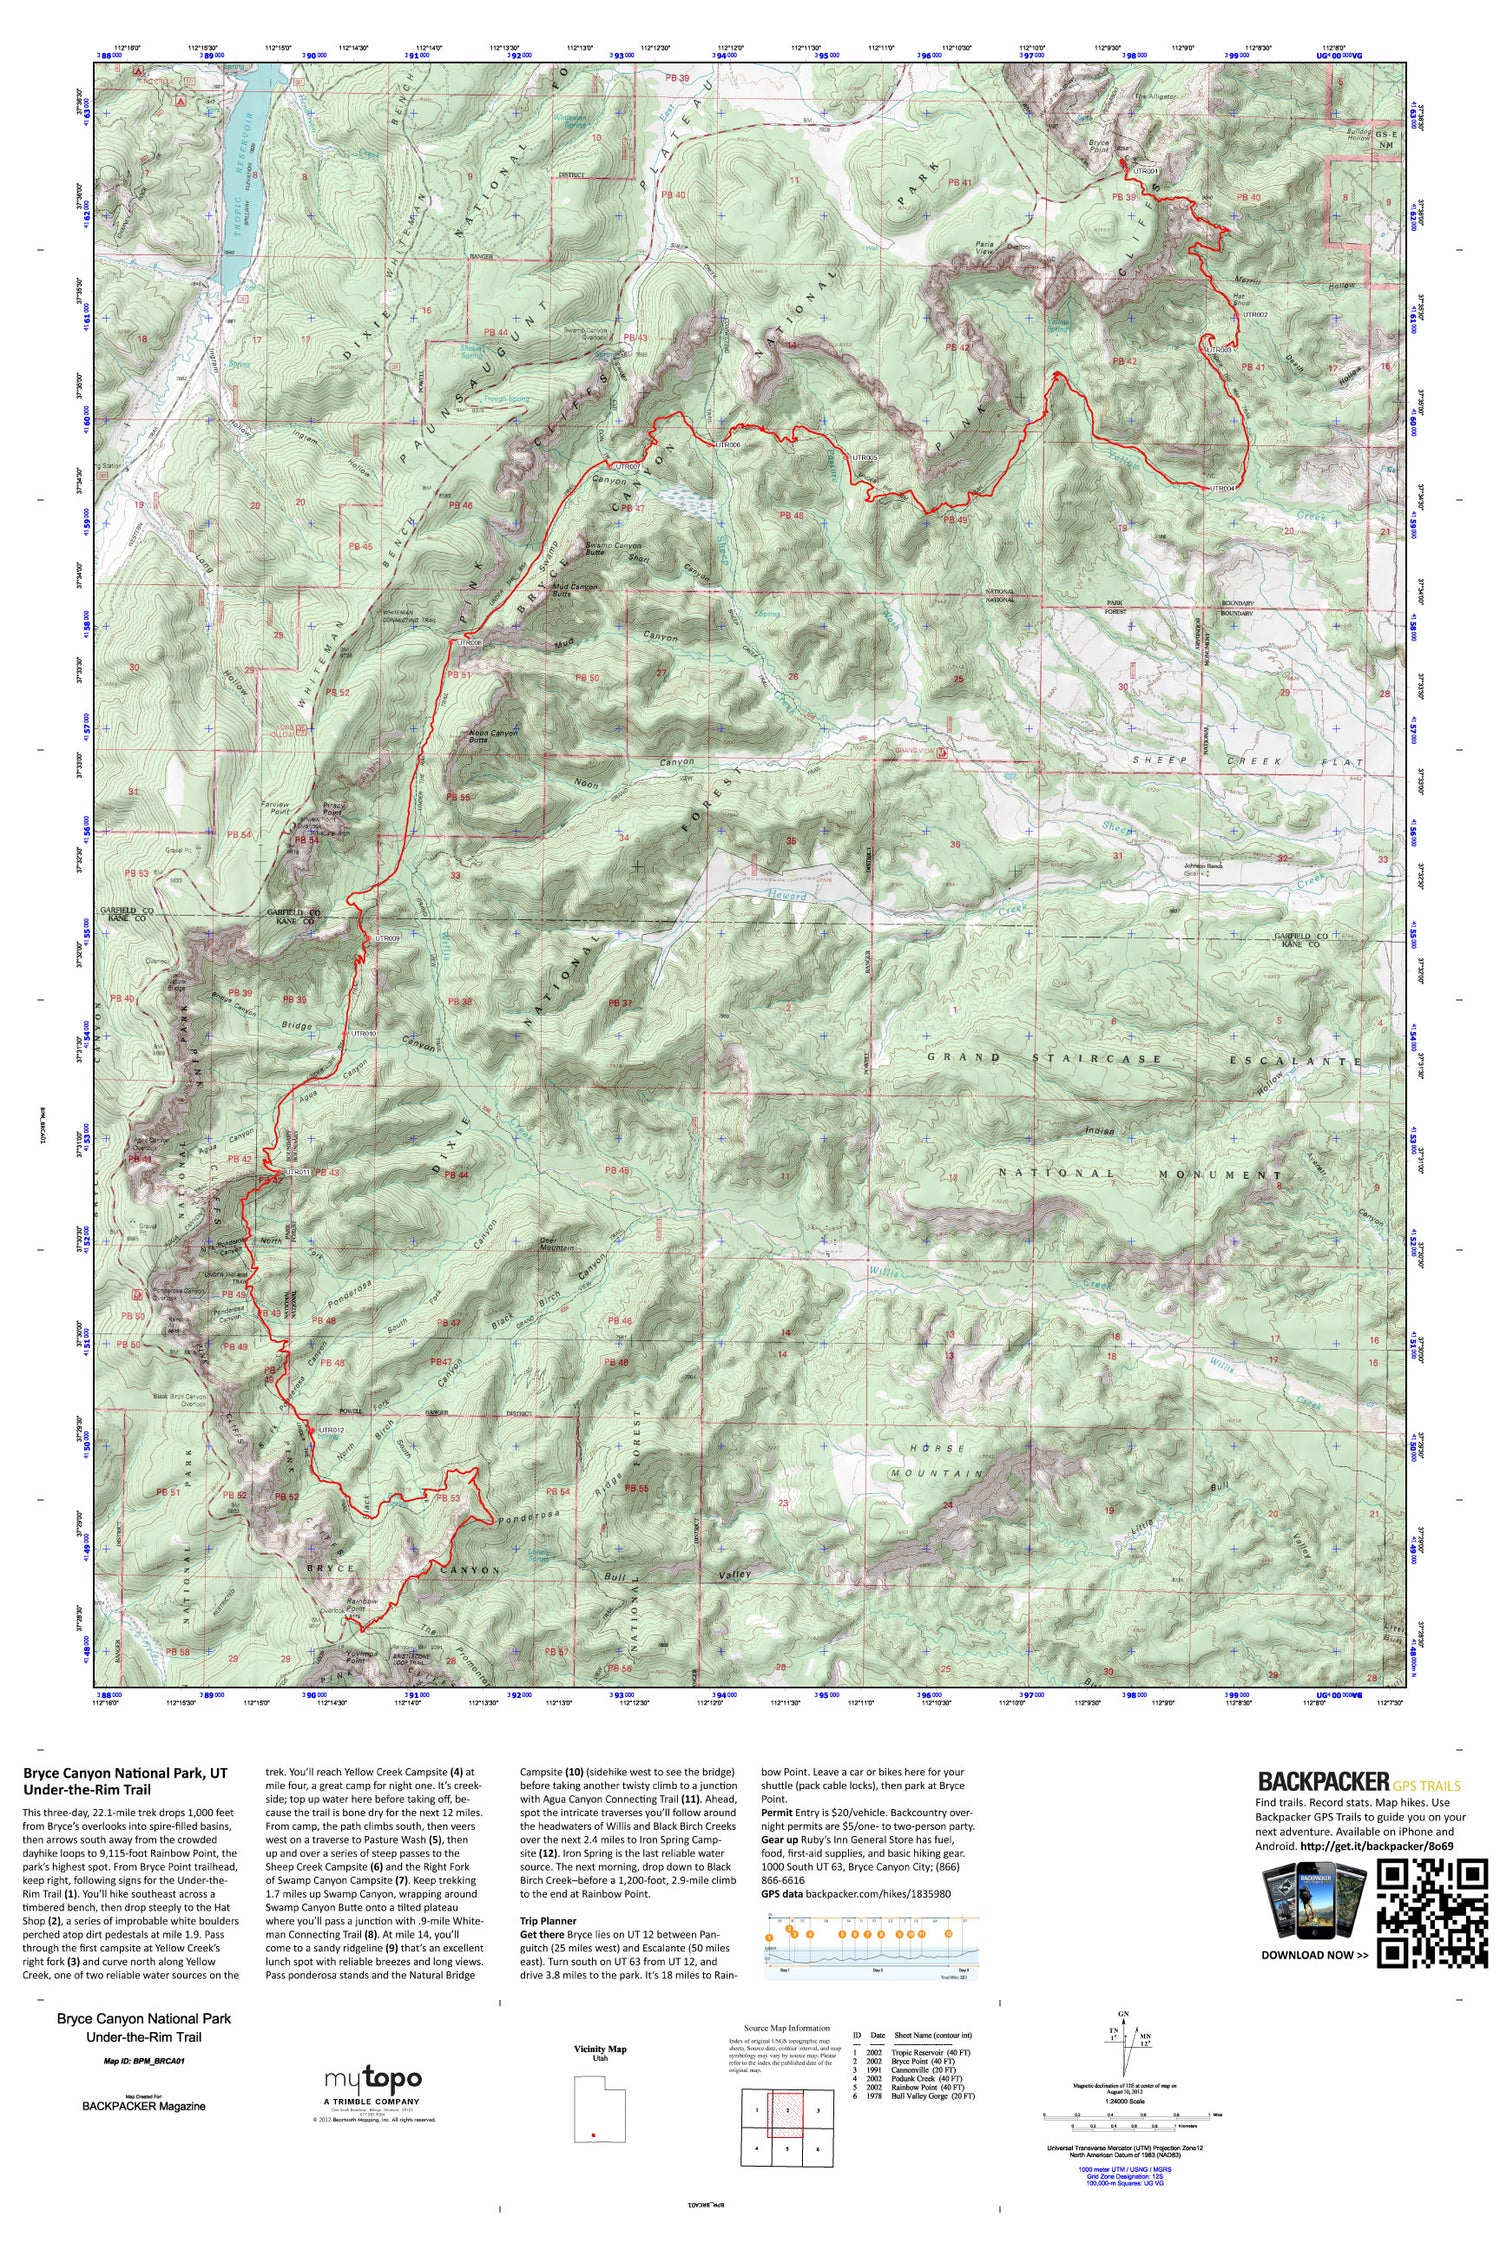 Under-the-Rim Trail Map (Bryce Canyon NP, Utah) Image